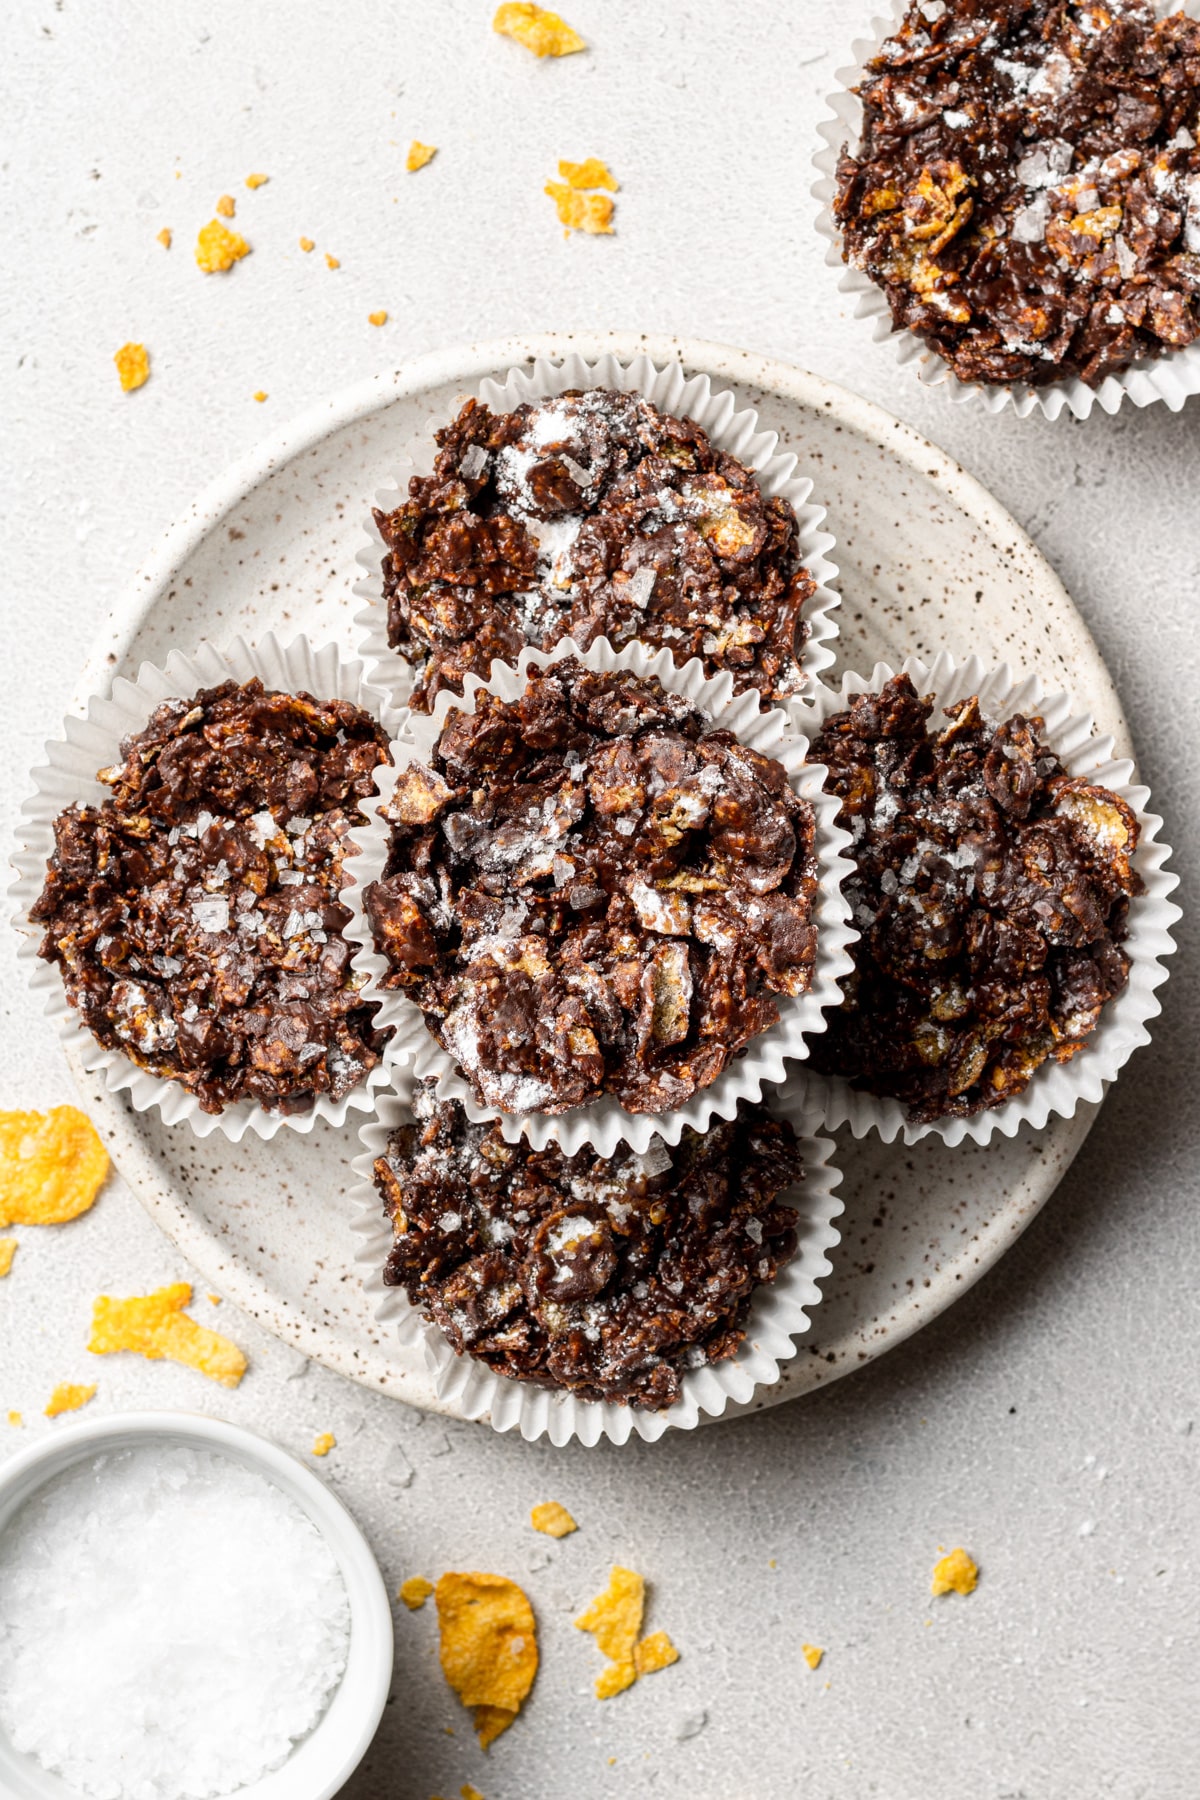 five chocolate cornflake cakes on a plate